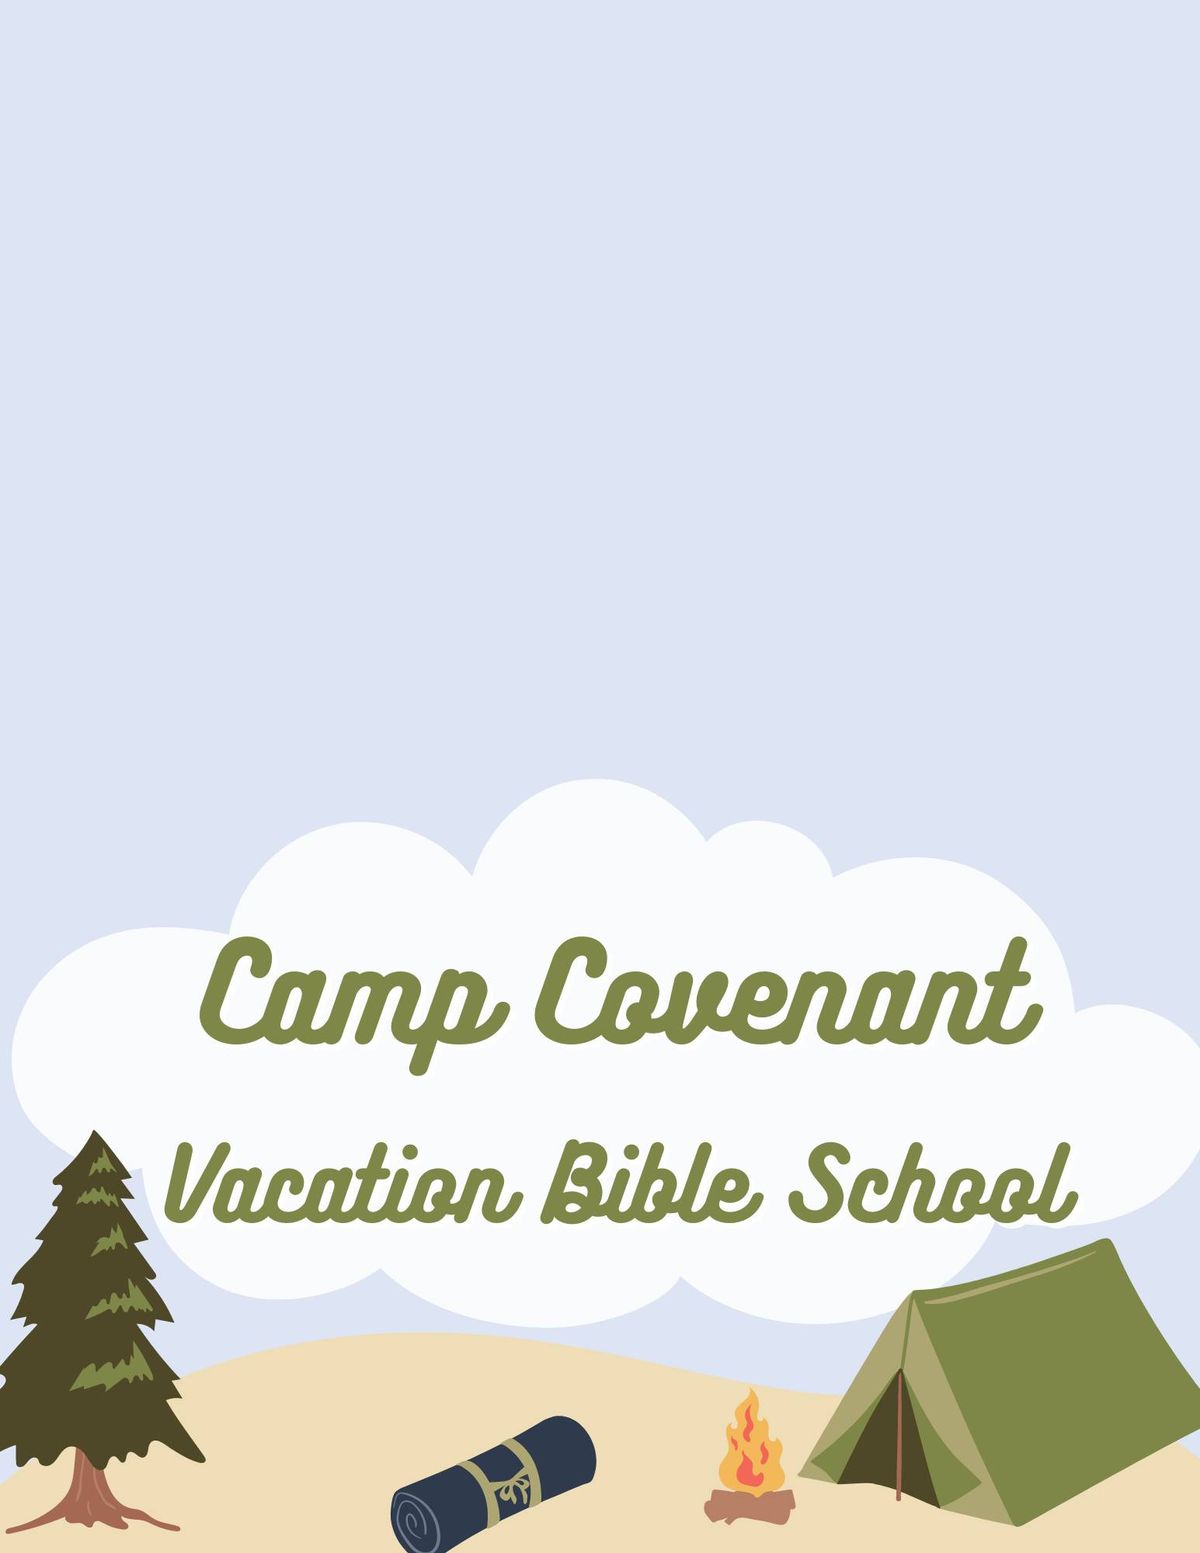 Camp Covenant Vacation Bible School